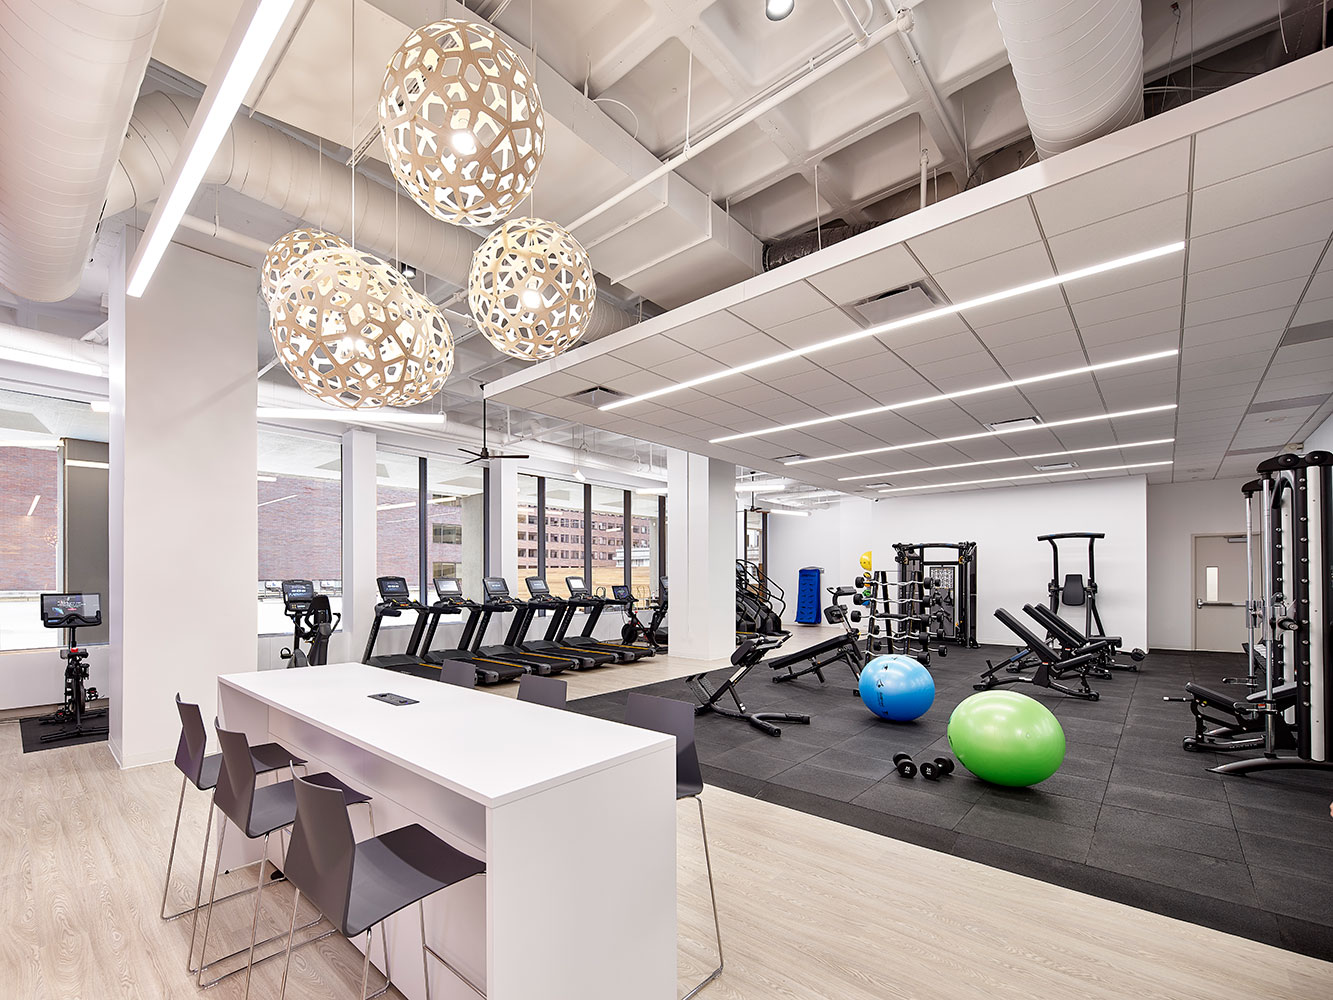 Does Having an Amenity Center Increases the Value of Your Commercial Property?